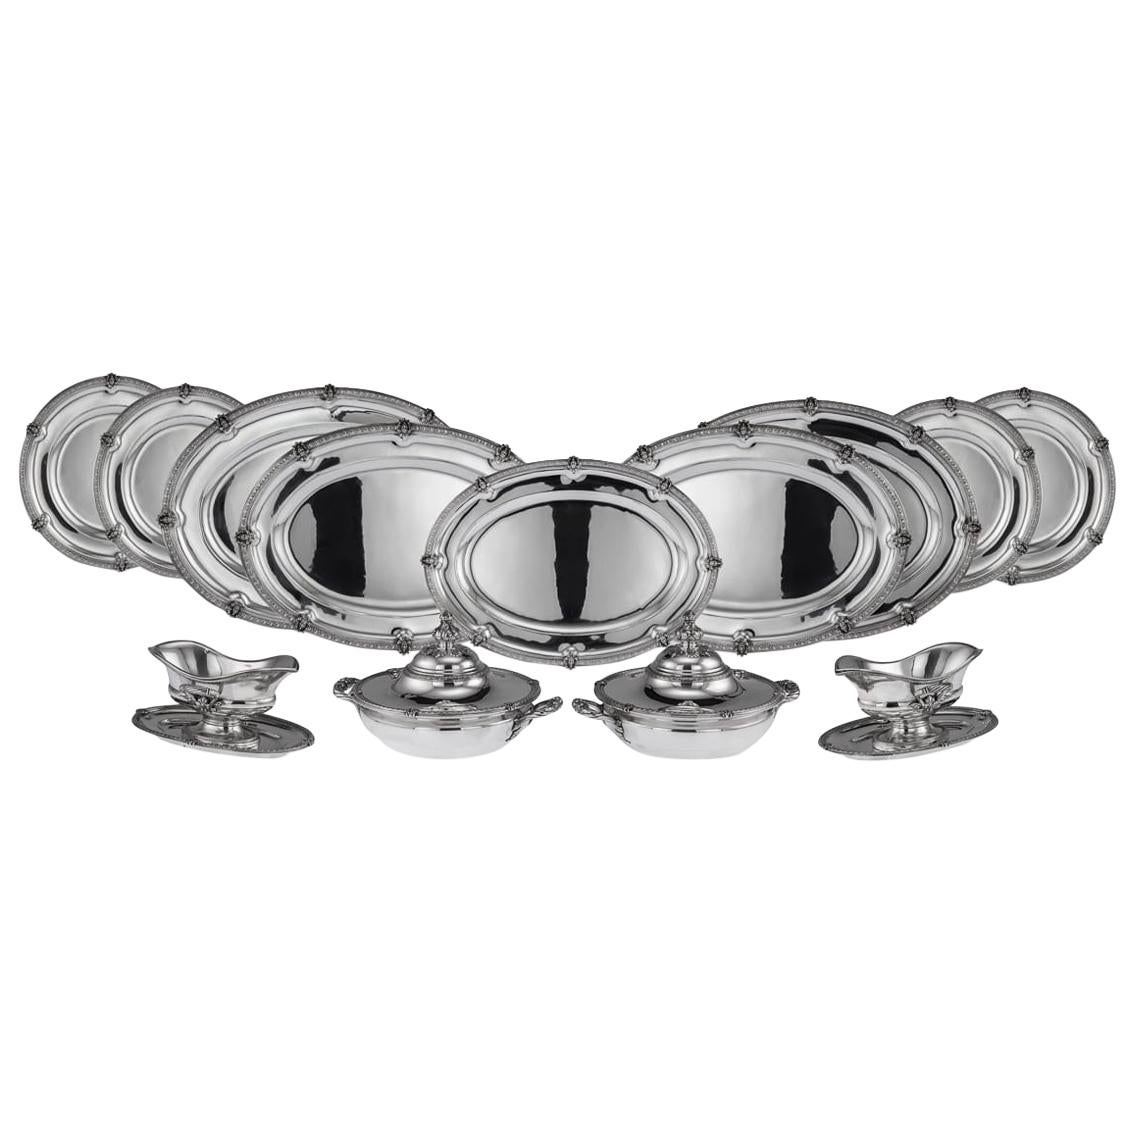 French Solid Silver Large Dinner Service, Mon Odiot, Paris, circa 1890 For Sale